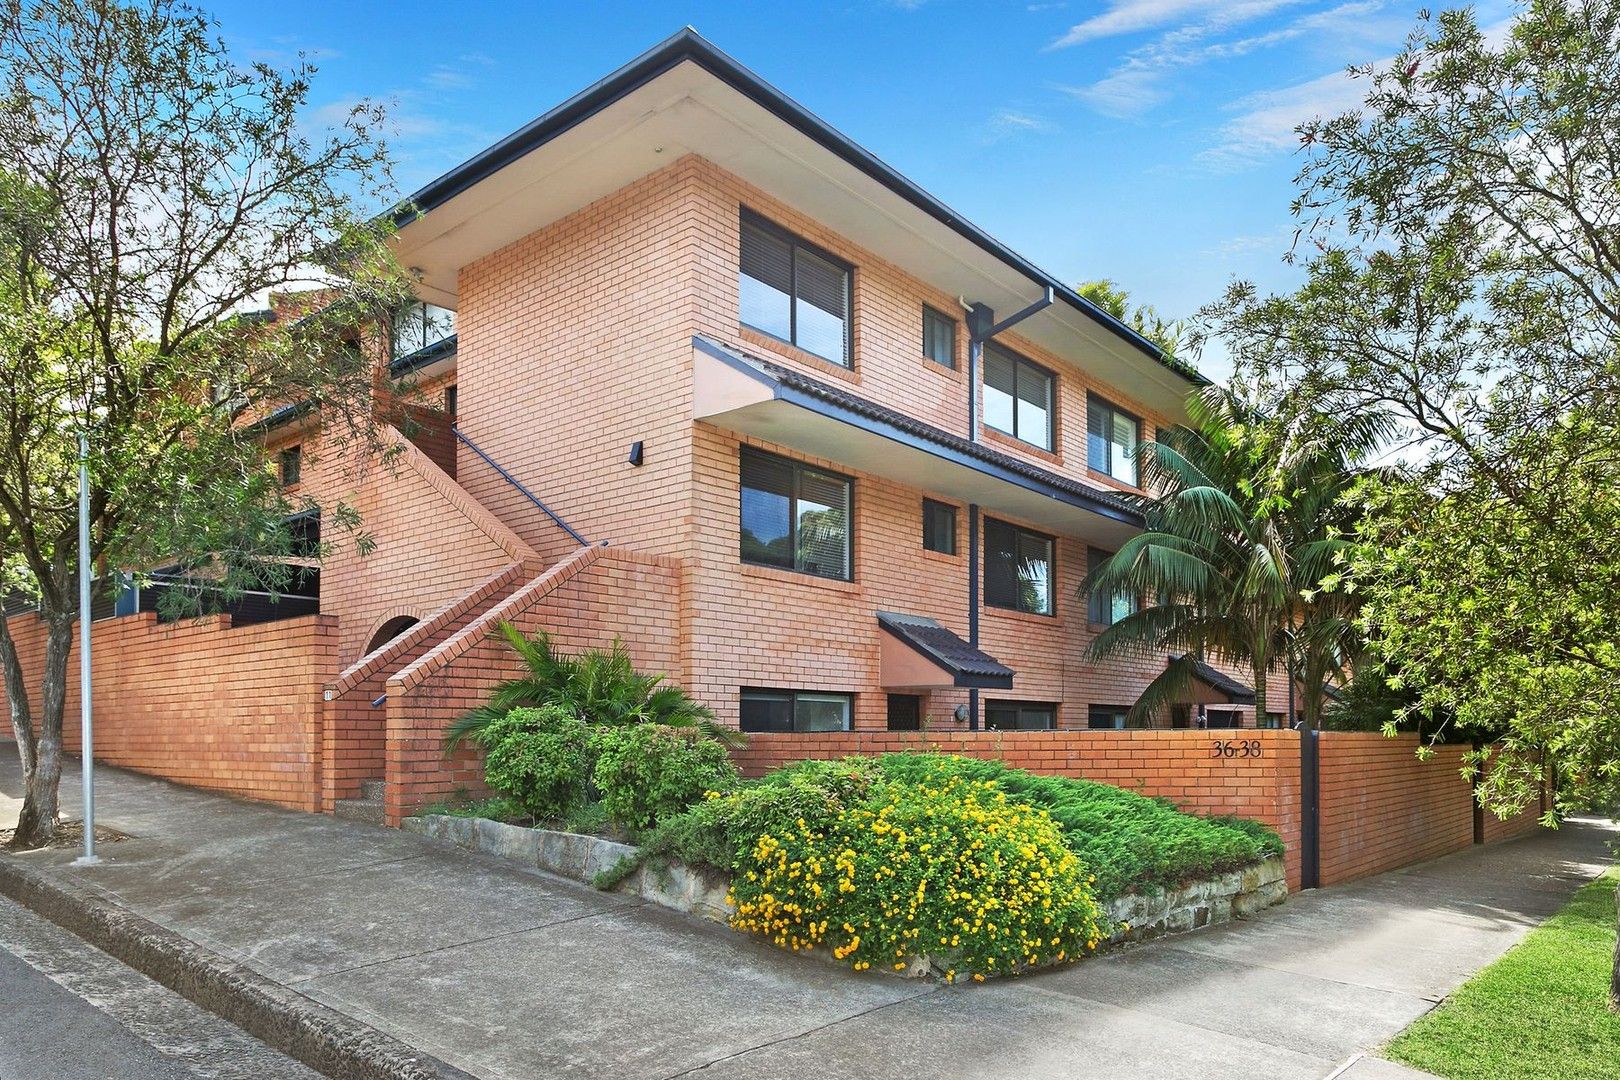 2 bedrooms Apartment / Unit / Flat in 13/36-38 Rosalind Street CAMMERAY NSW, 2062